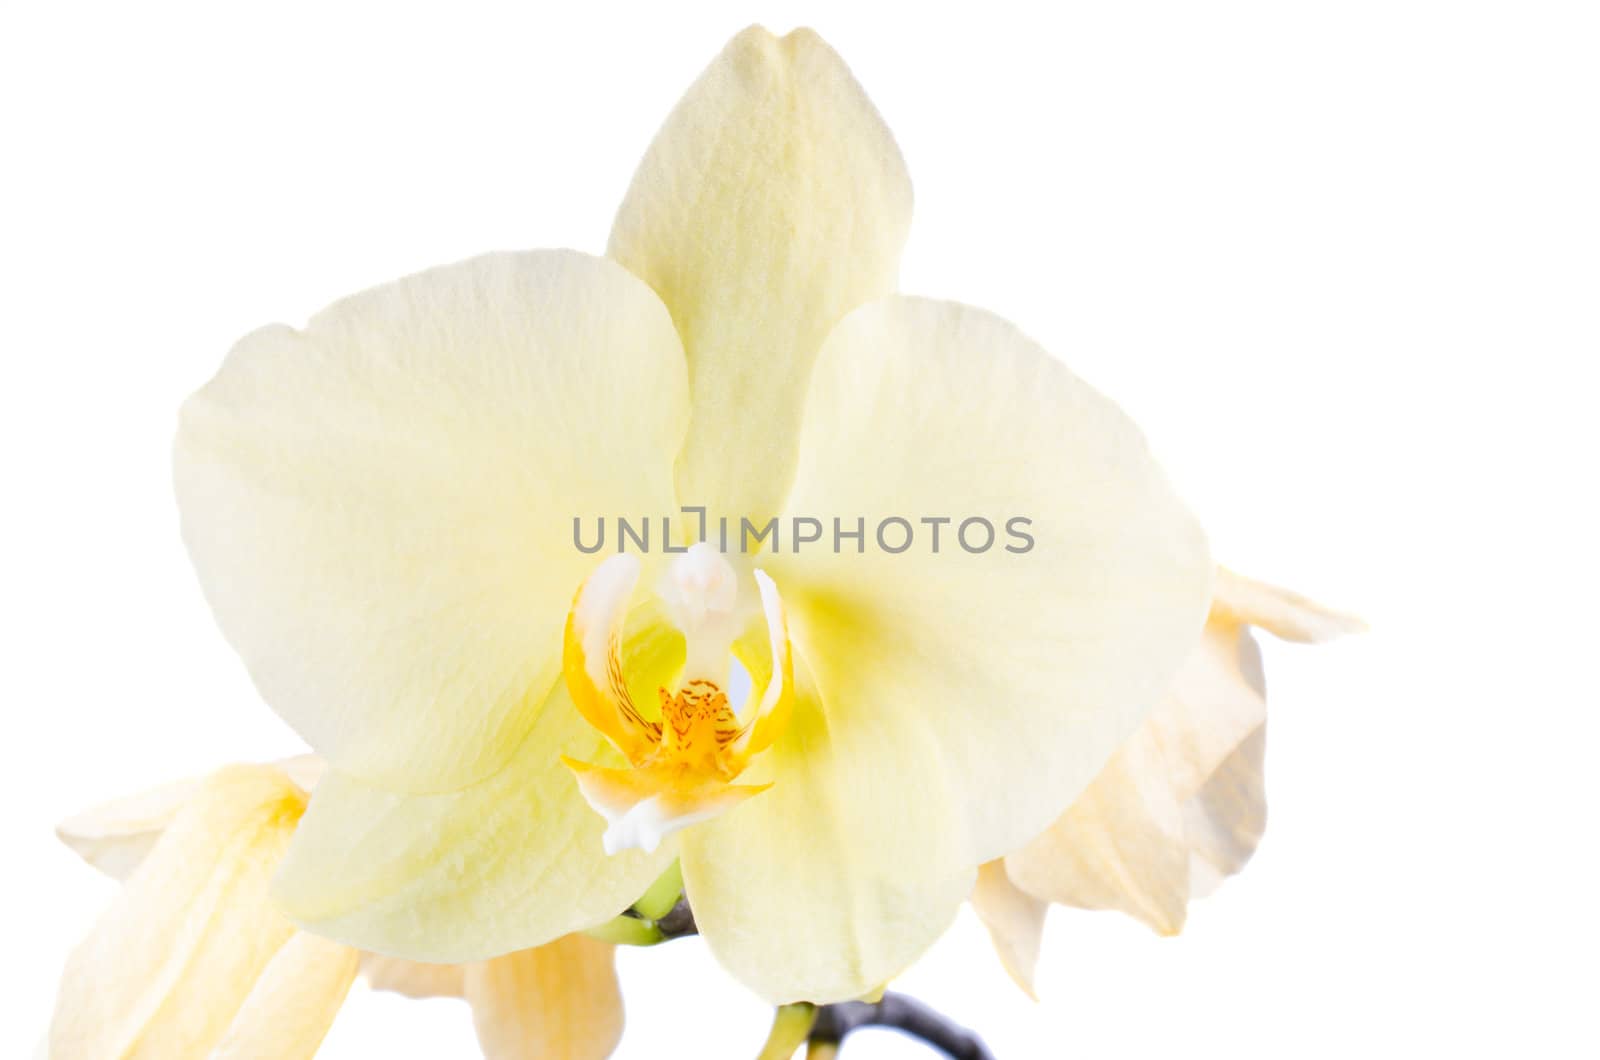 Yellow orchid on white background isolated